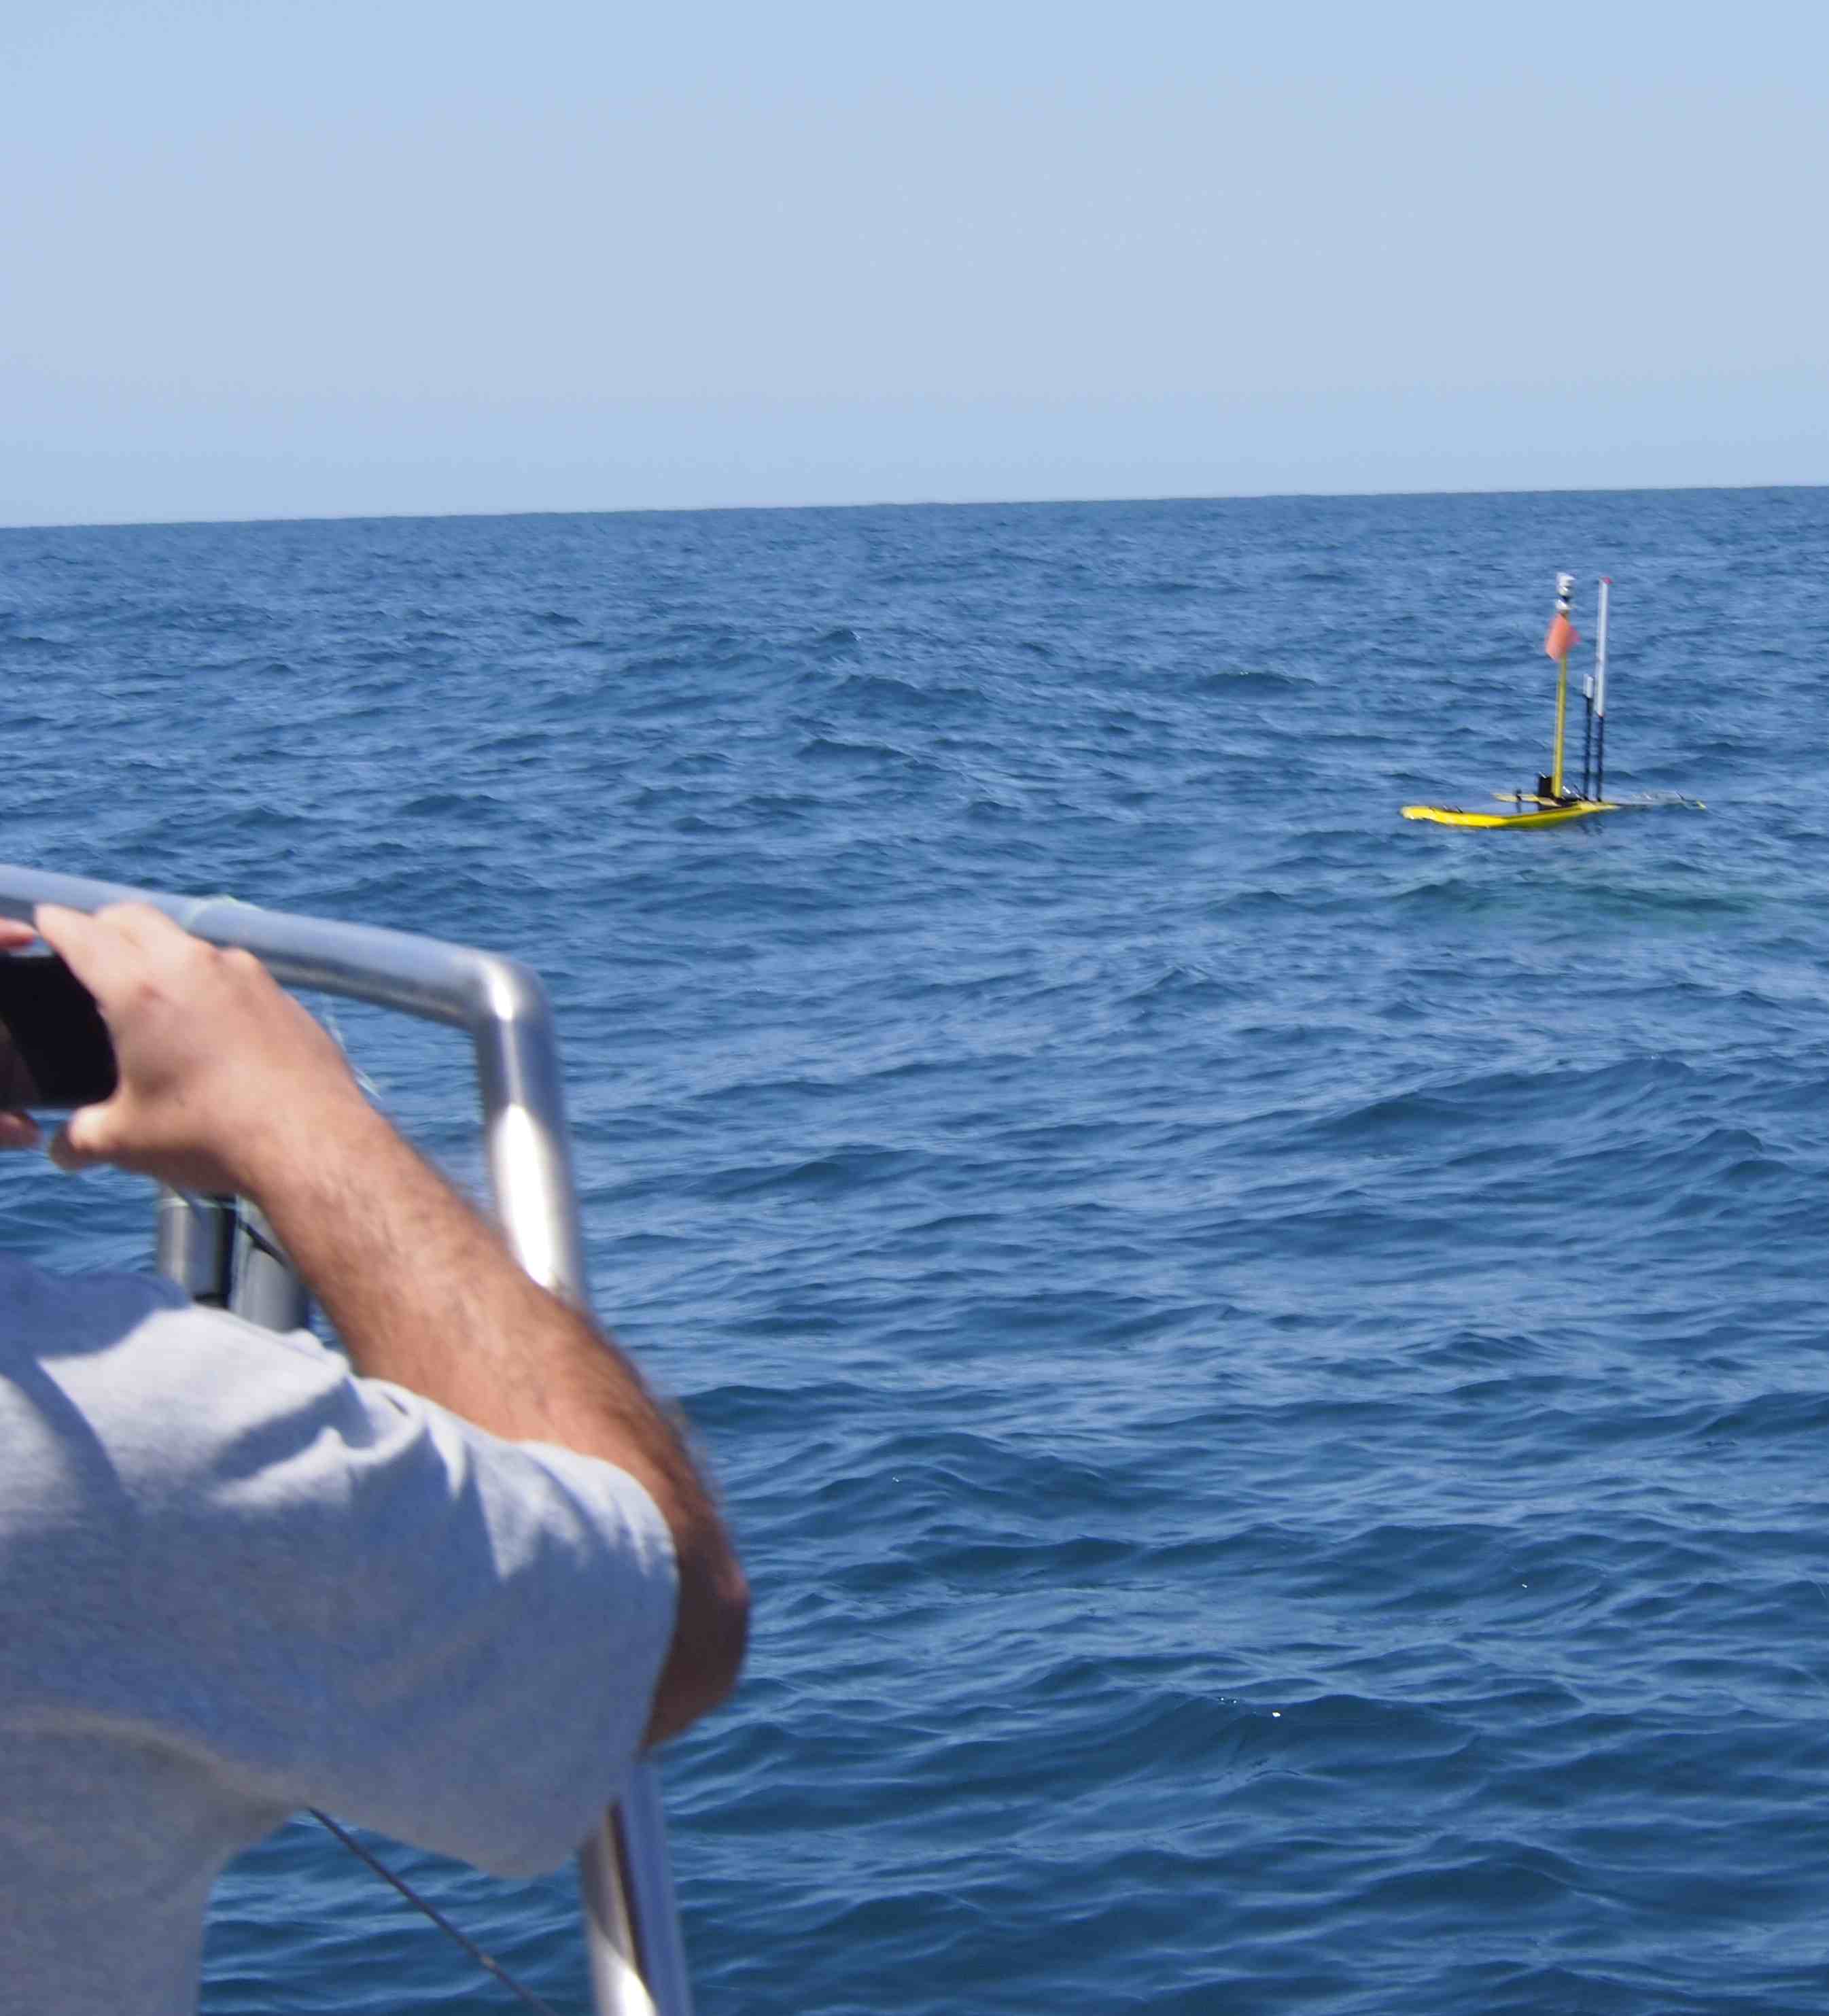 With no Mola's popping up, the AUV team approaches the WaveGlider to perform an AUV survey around it.